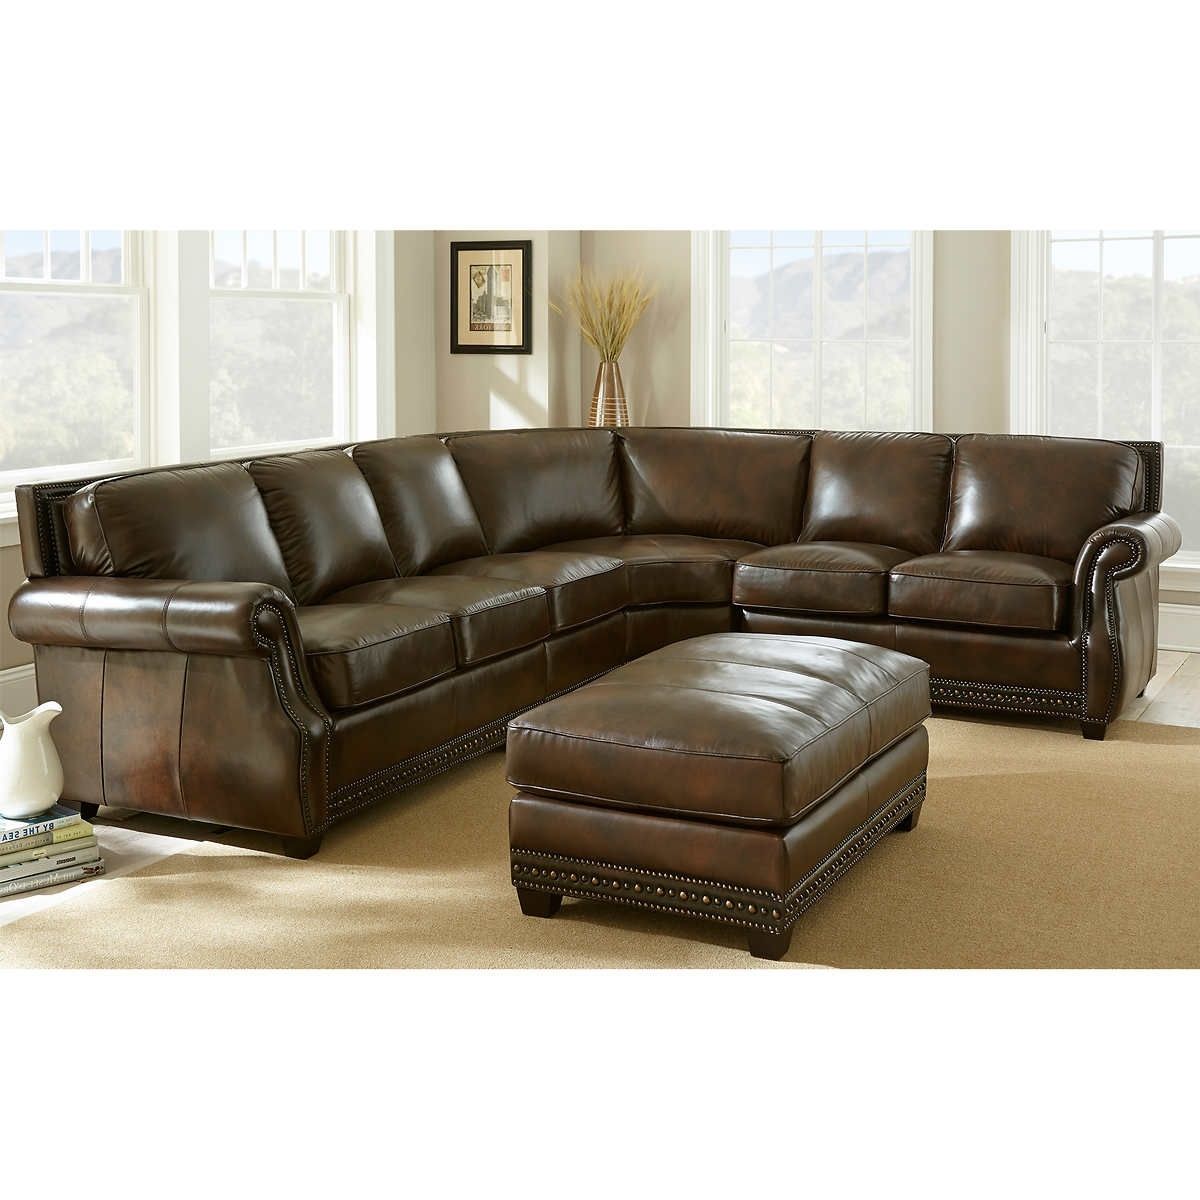 Sectional Sofas With Recliners Leather Inside Most Recent Fancy Leather Sectional Sofa With Recliner 30 On Sofas And Couches (View 11 of 15)